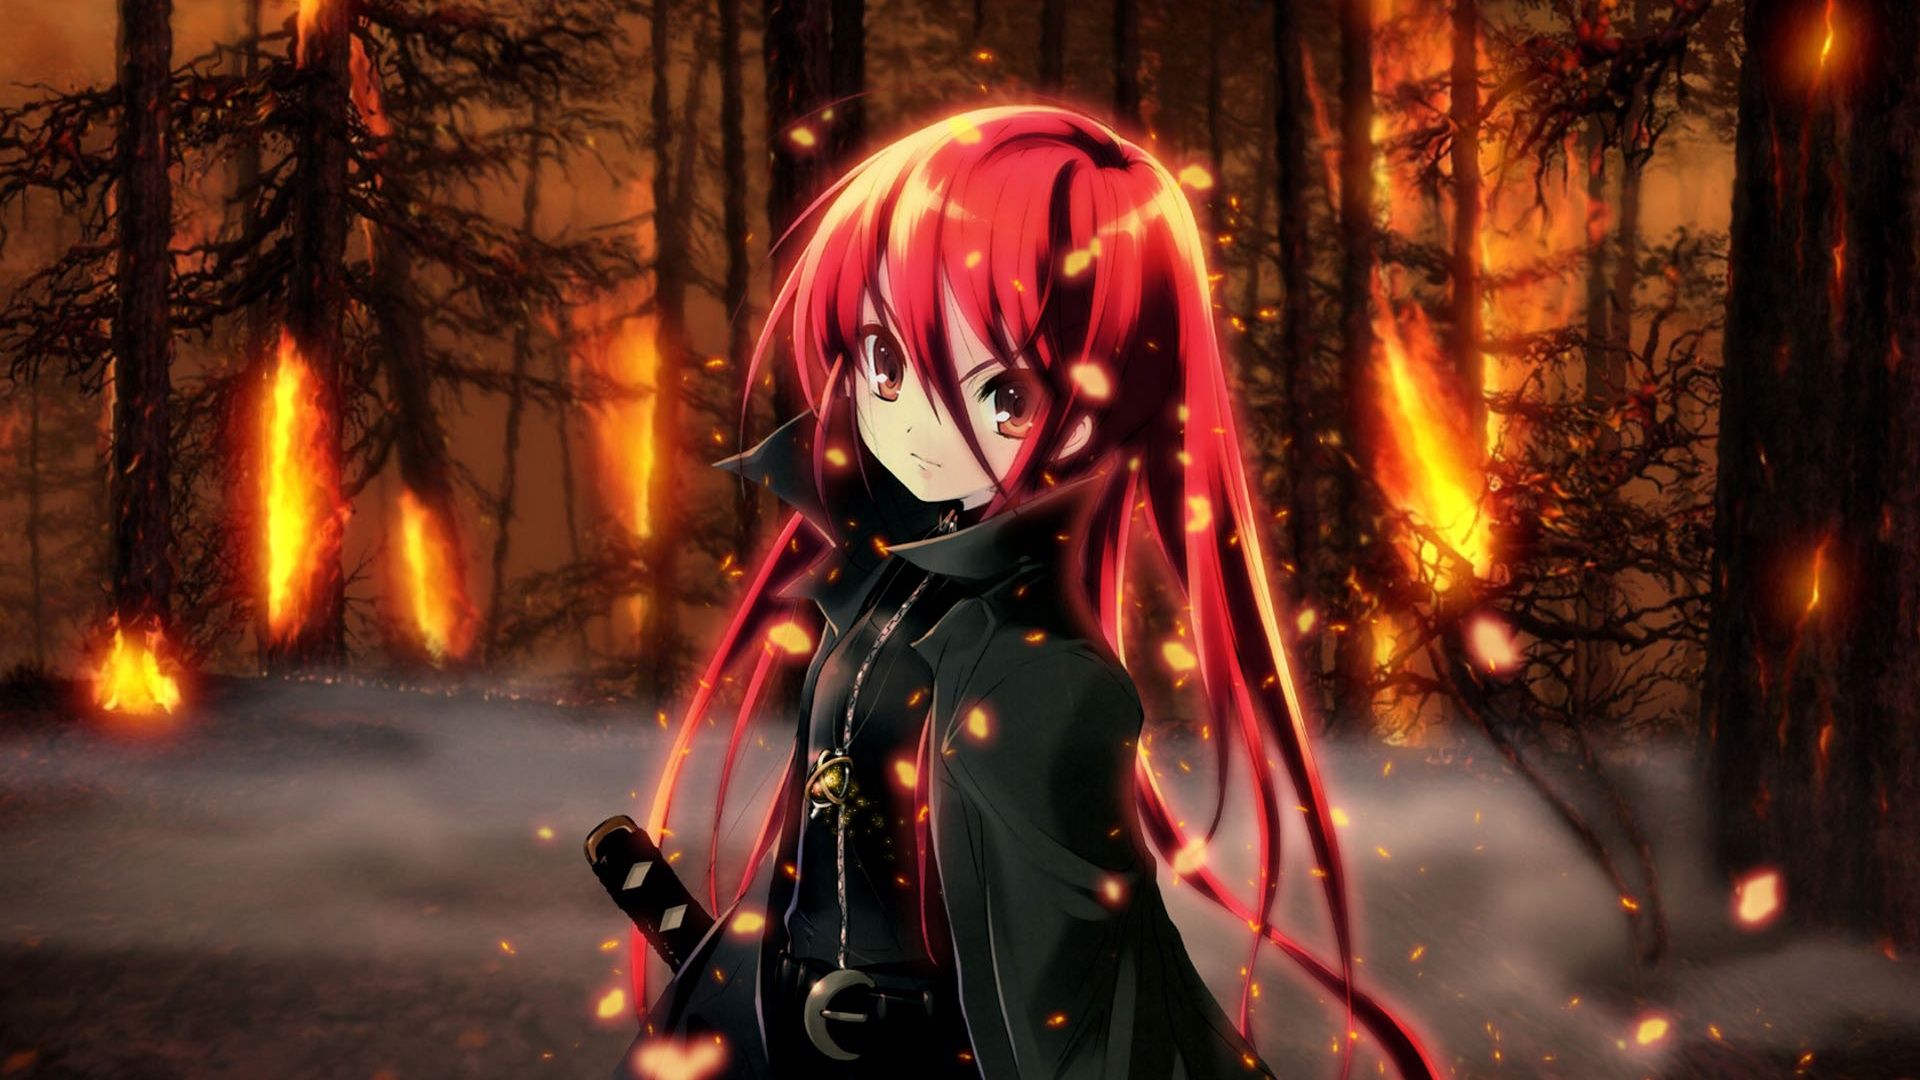 Wallpaper In the forest of red hair anime girl 1920x1200 HD Picture, Image